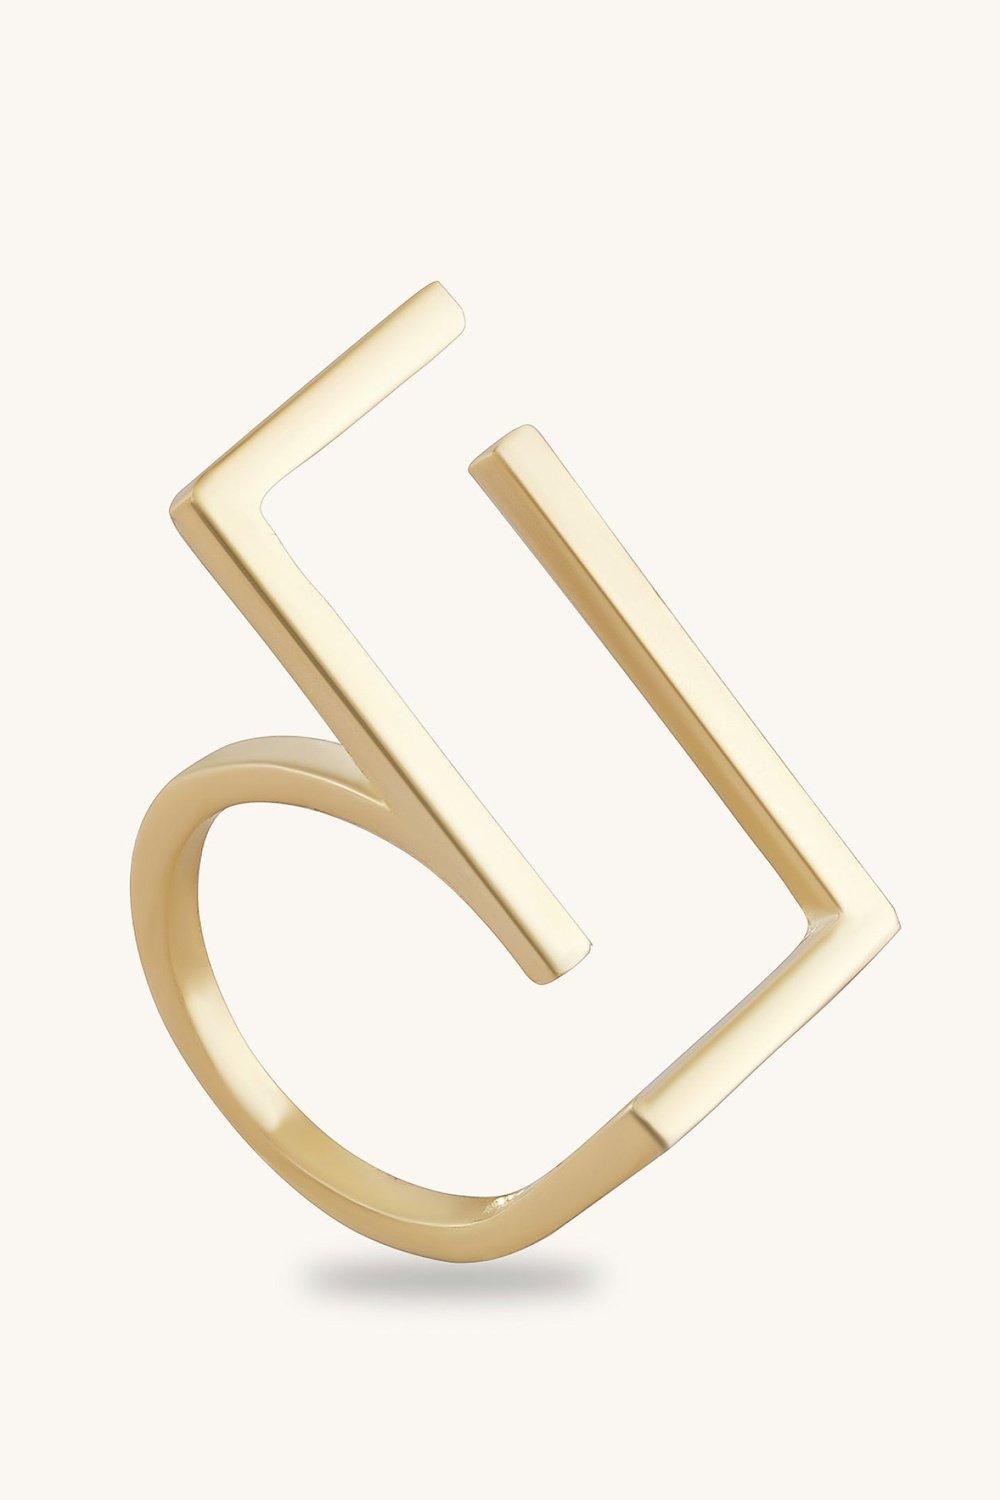 Gapped Rectangle Ring